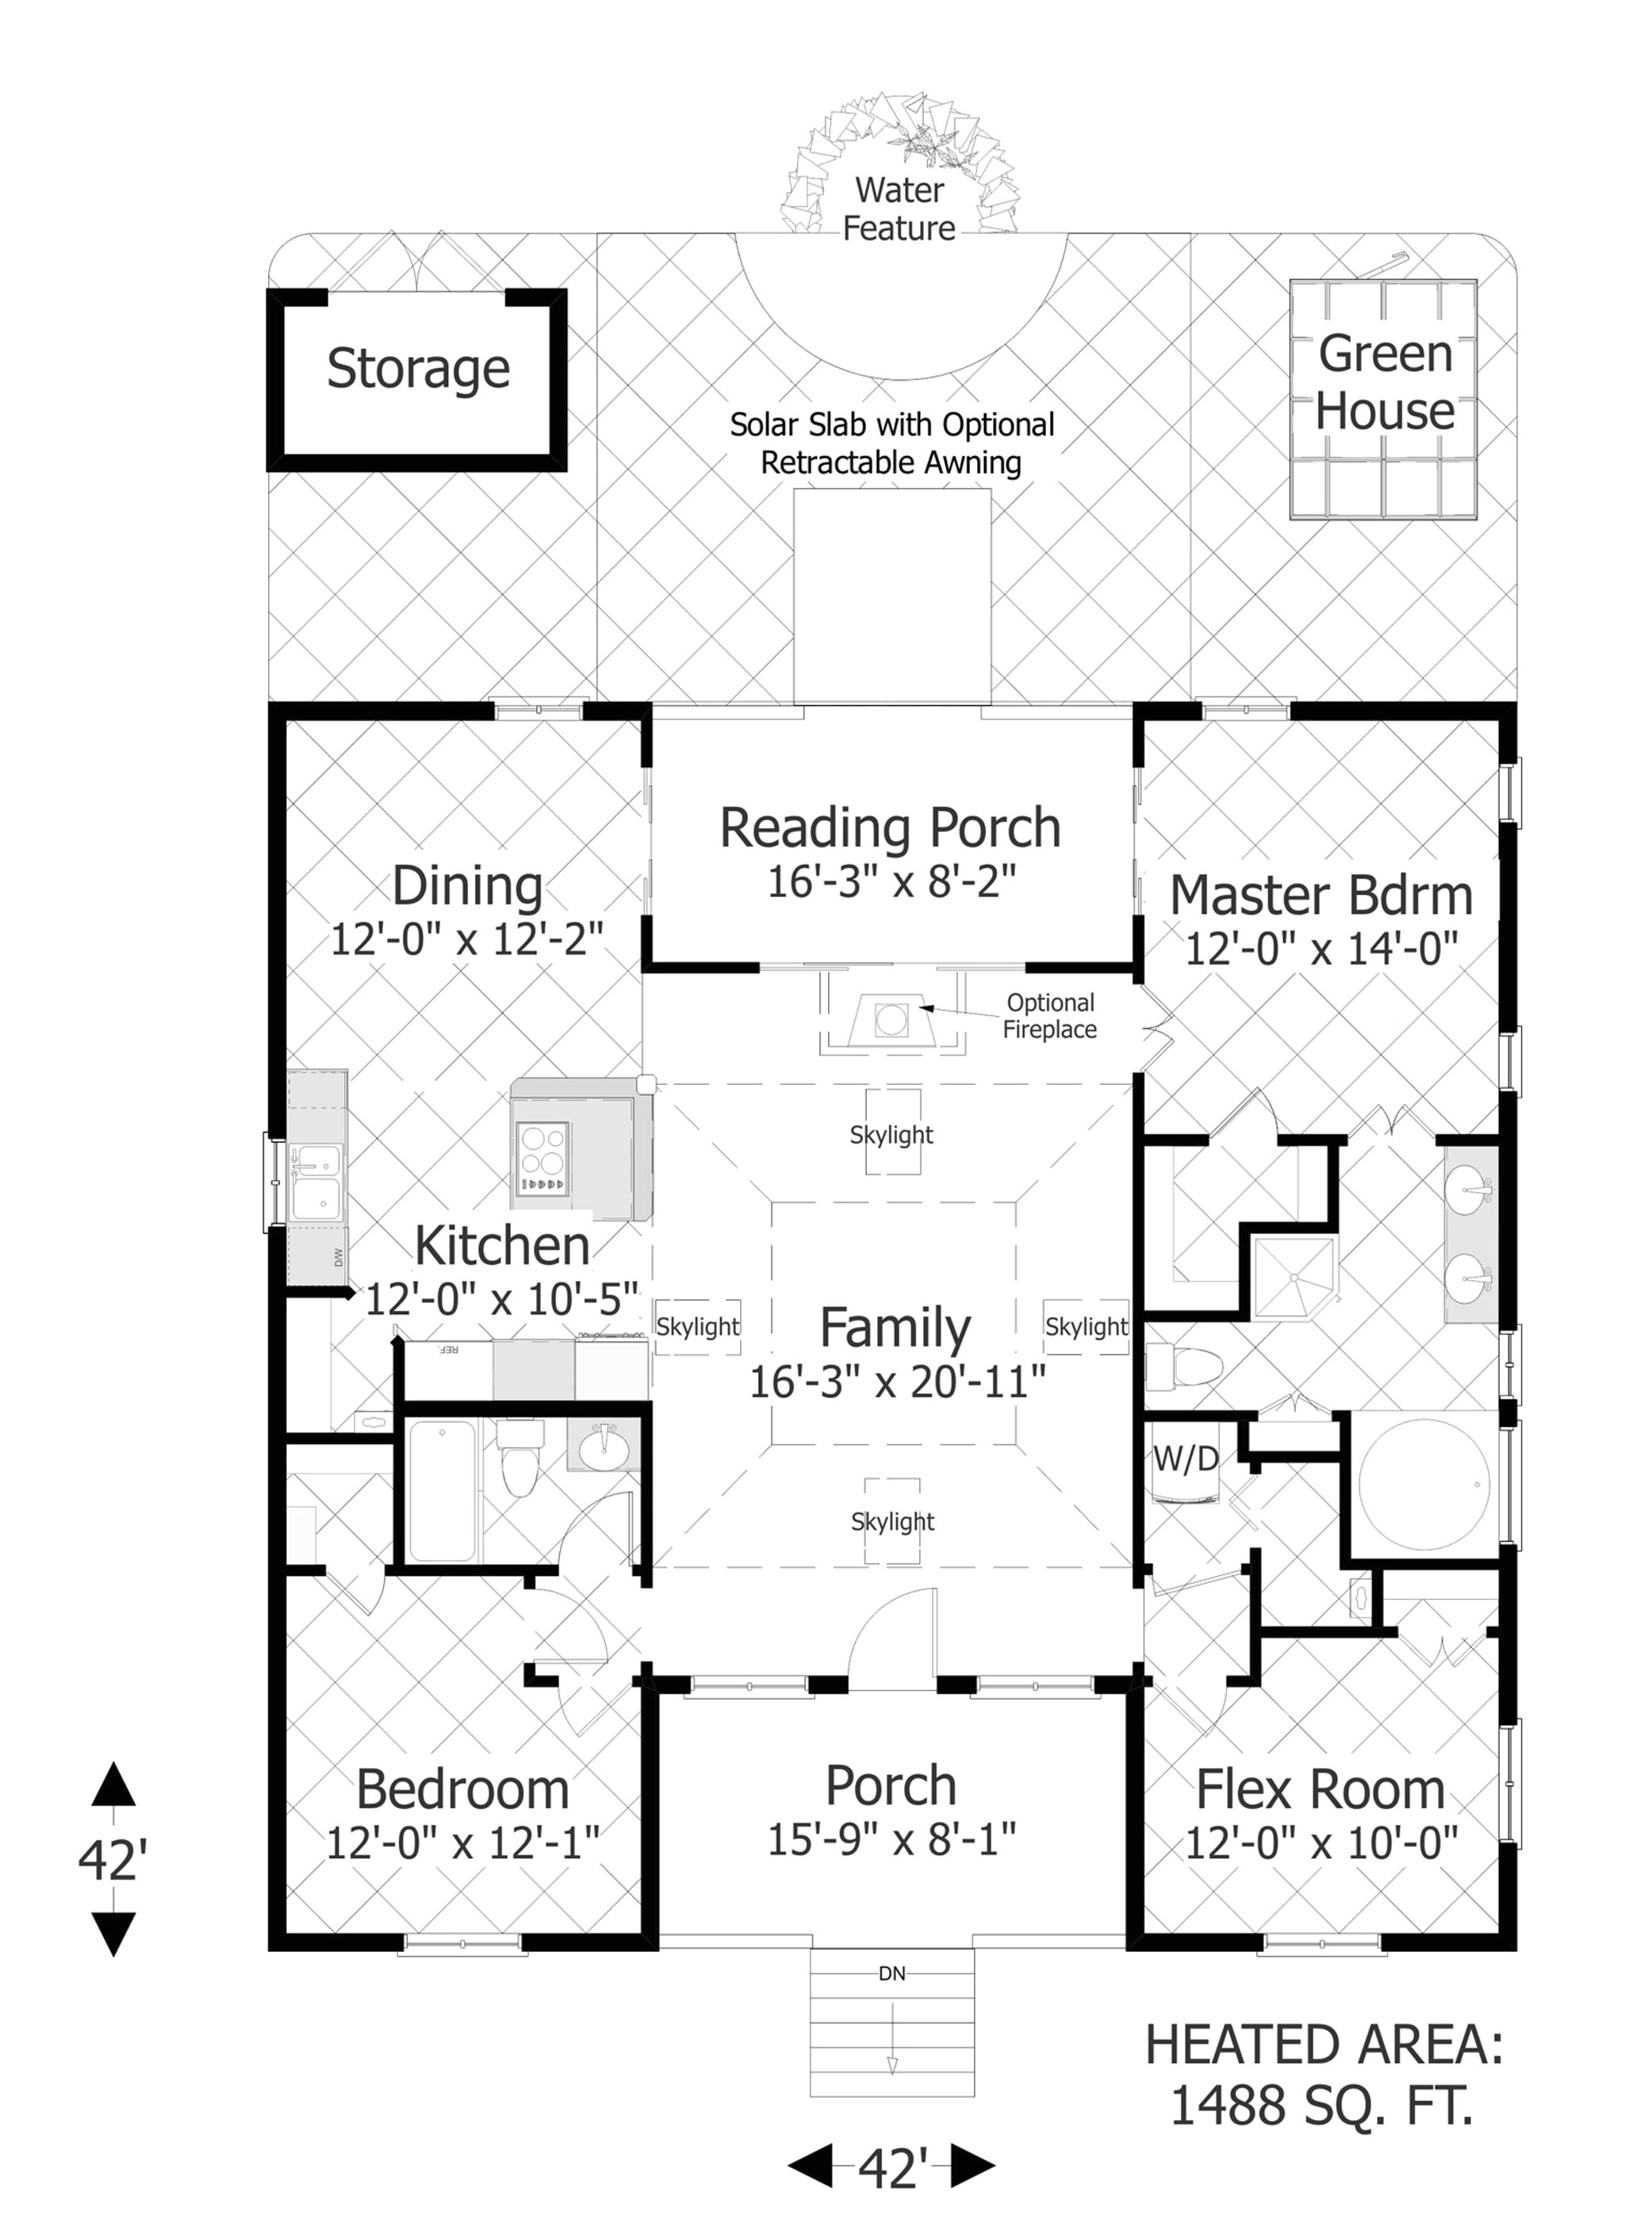 Box Home Plans the Eco Box 3107 3 Bedrooms and 2 Baths the House